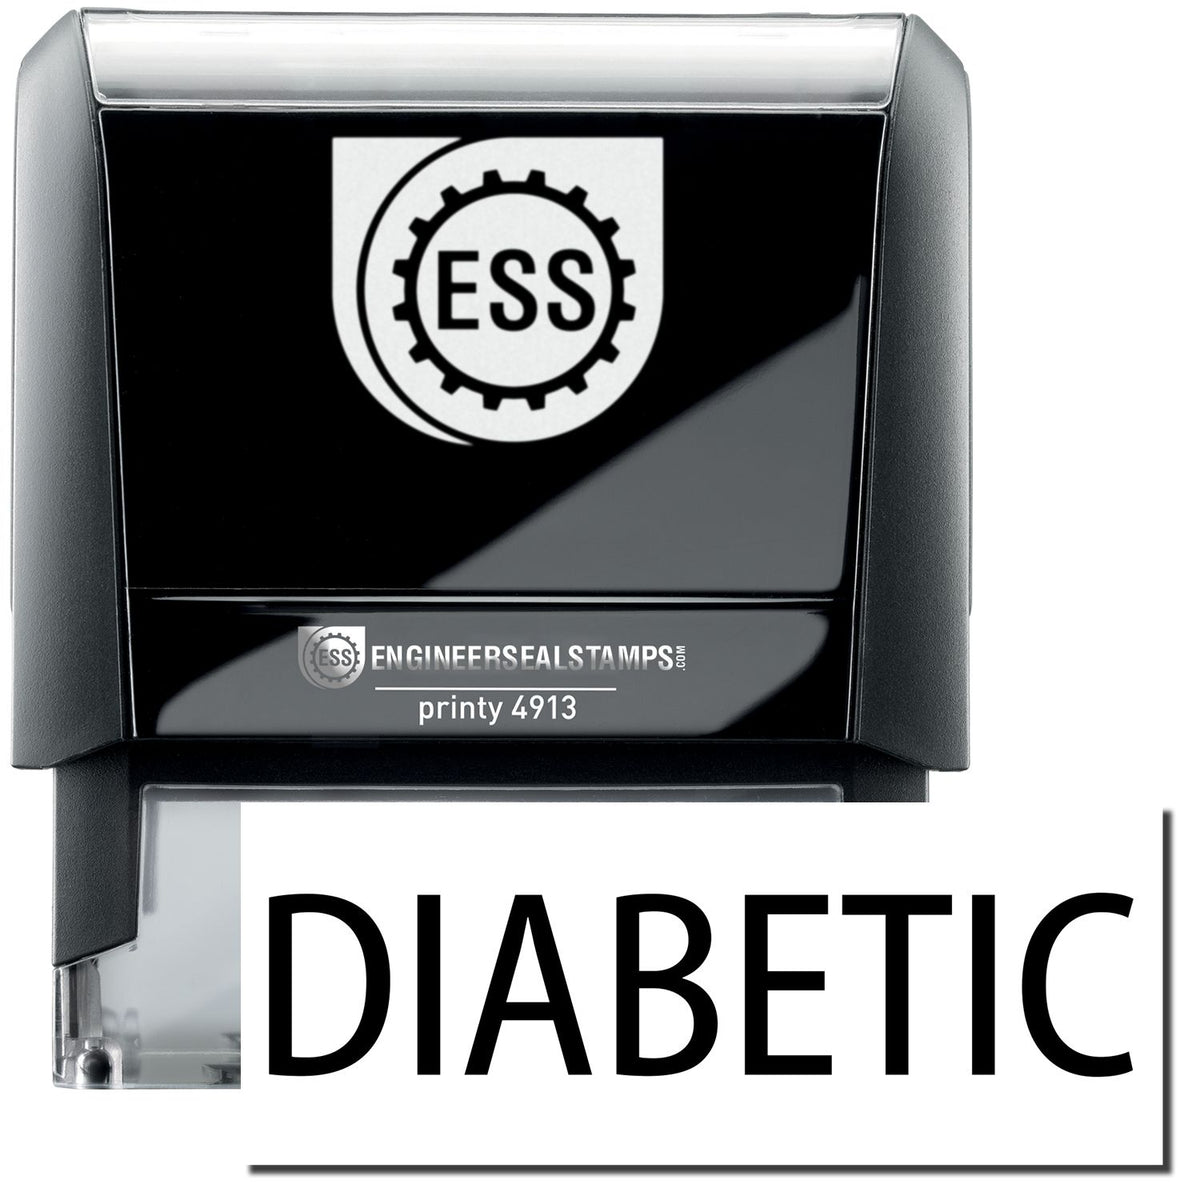 A self-inking stamp with a stamped image showing how the text &quot;DIABETIC&quot; in a large bold font is displayed by it.